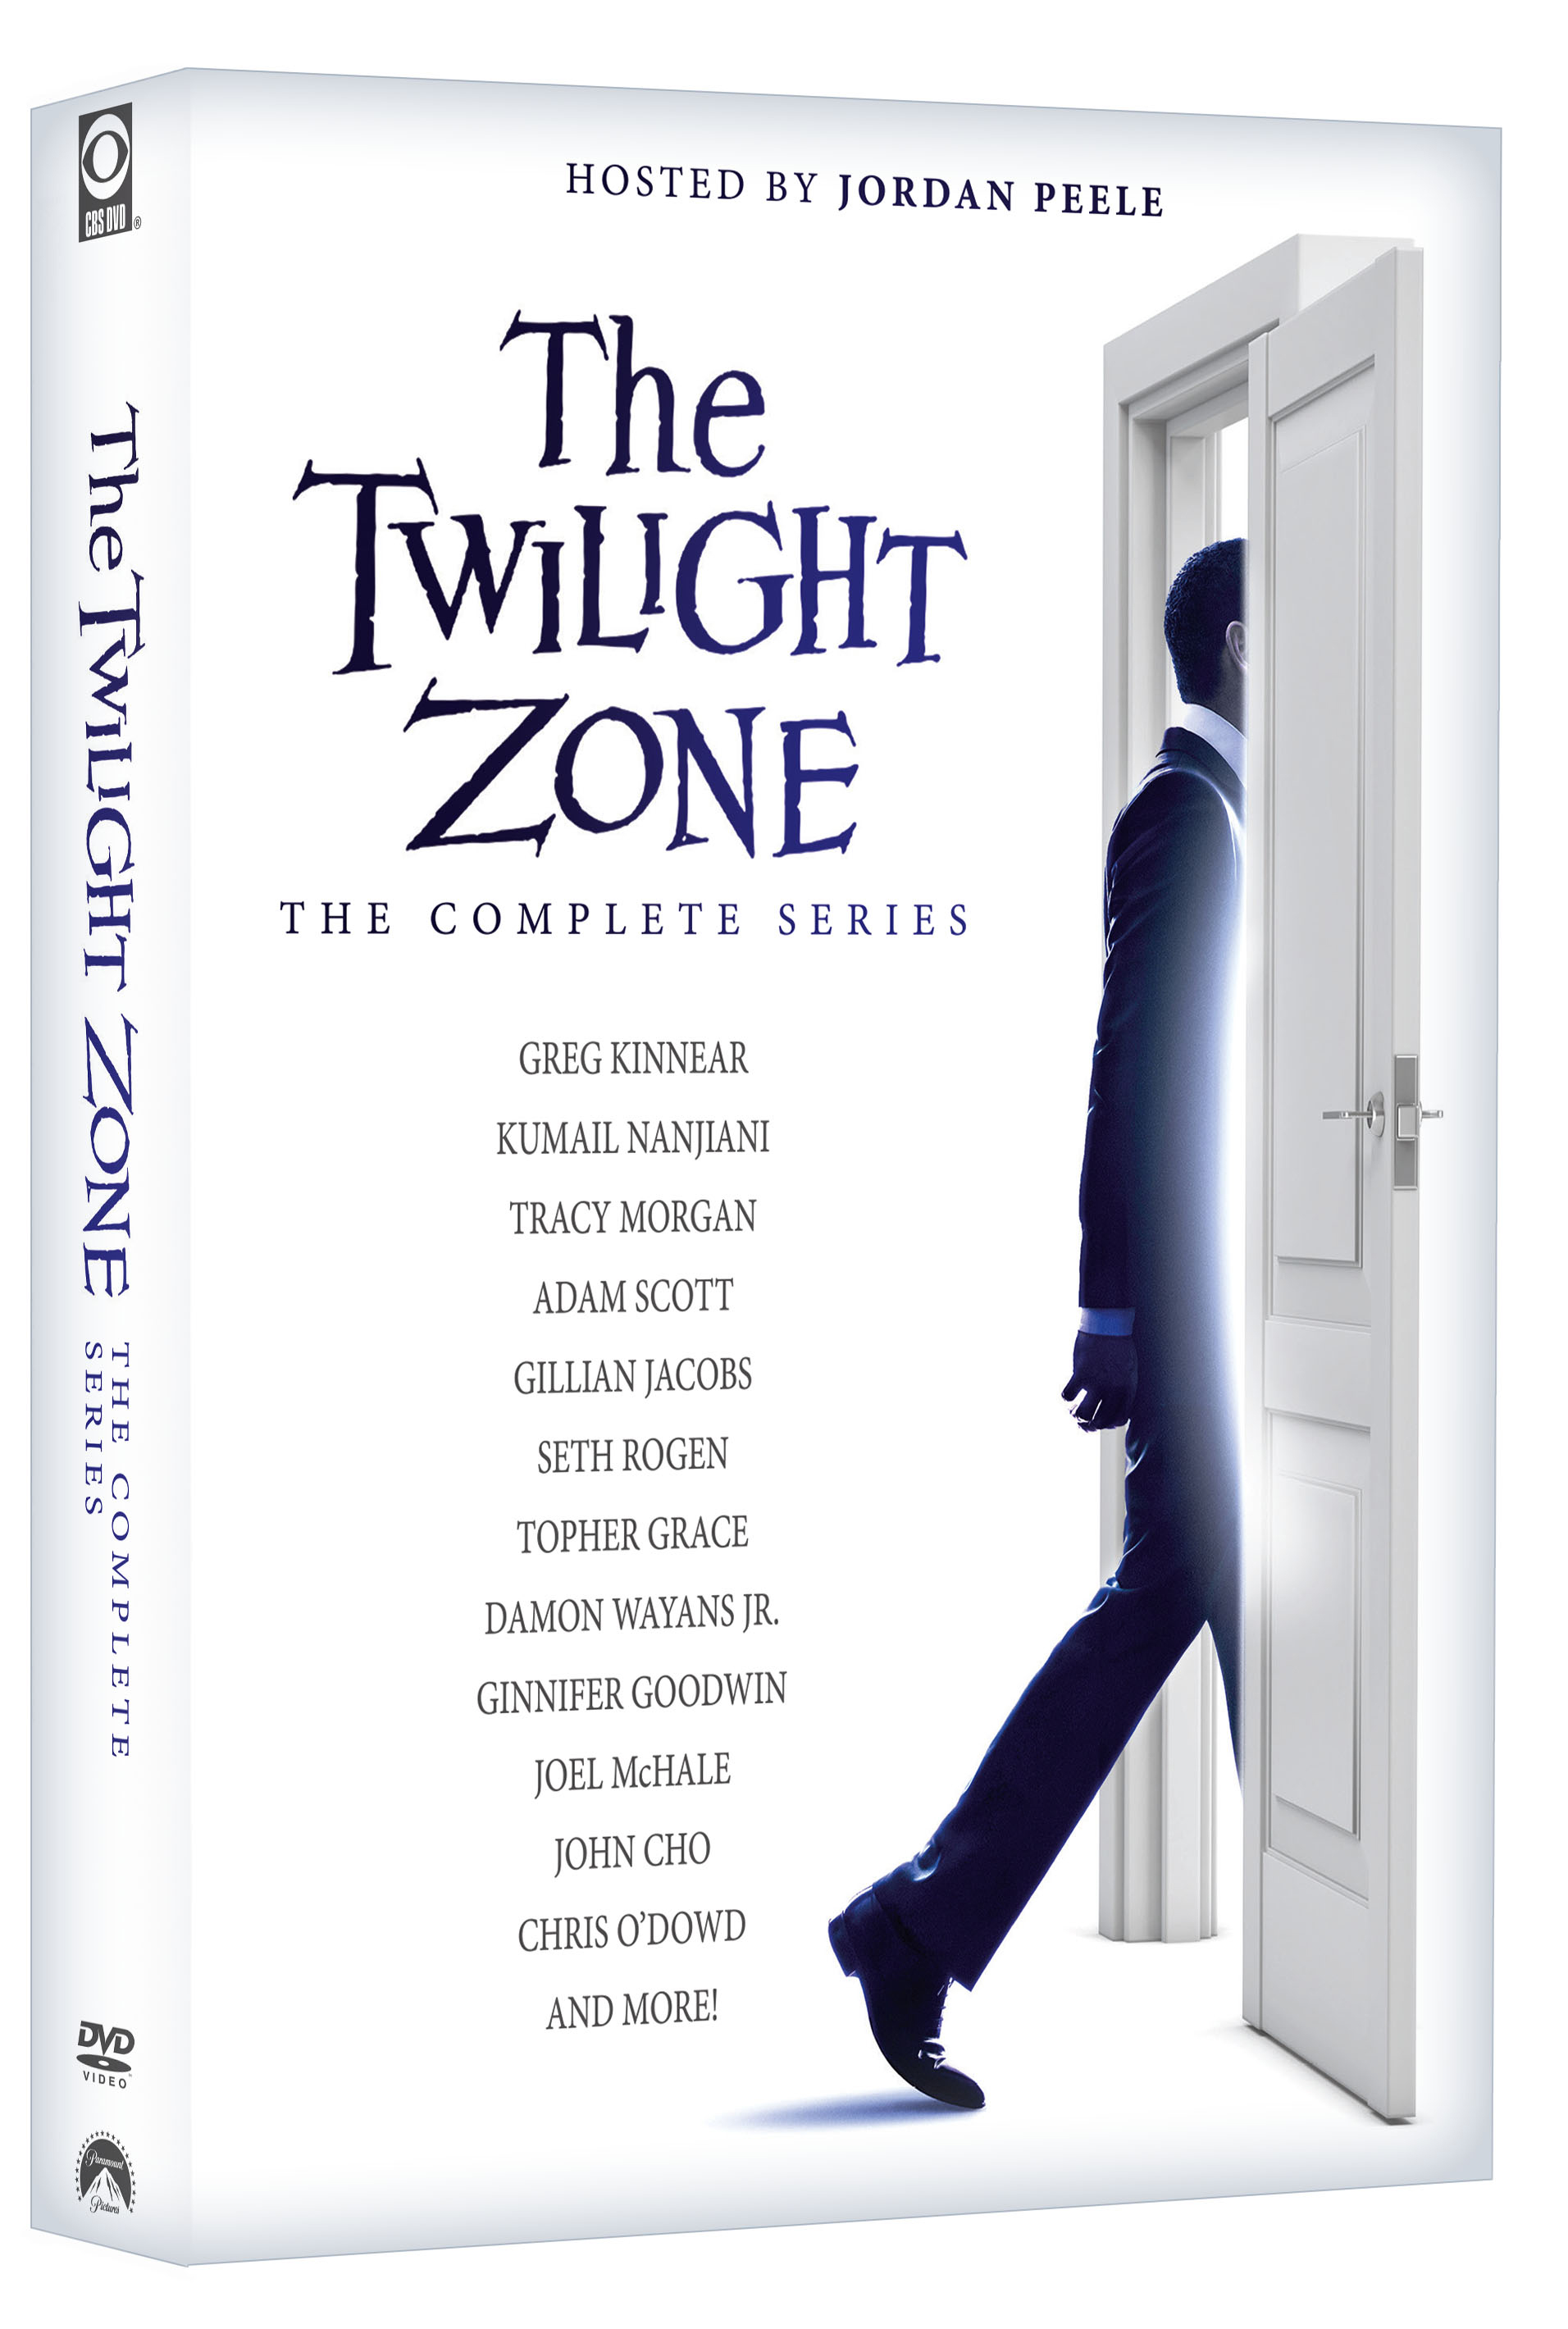 The Twilight Zone: The Complete Series [Blu-ray] [1959] - Best Buy